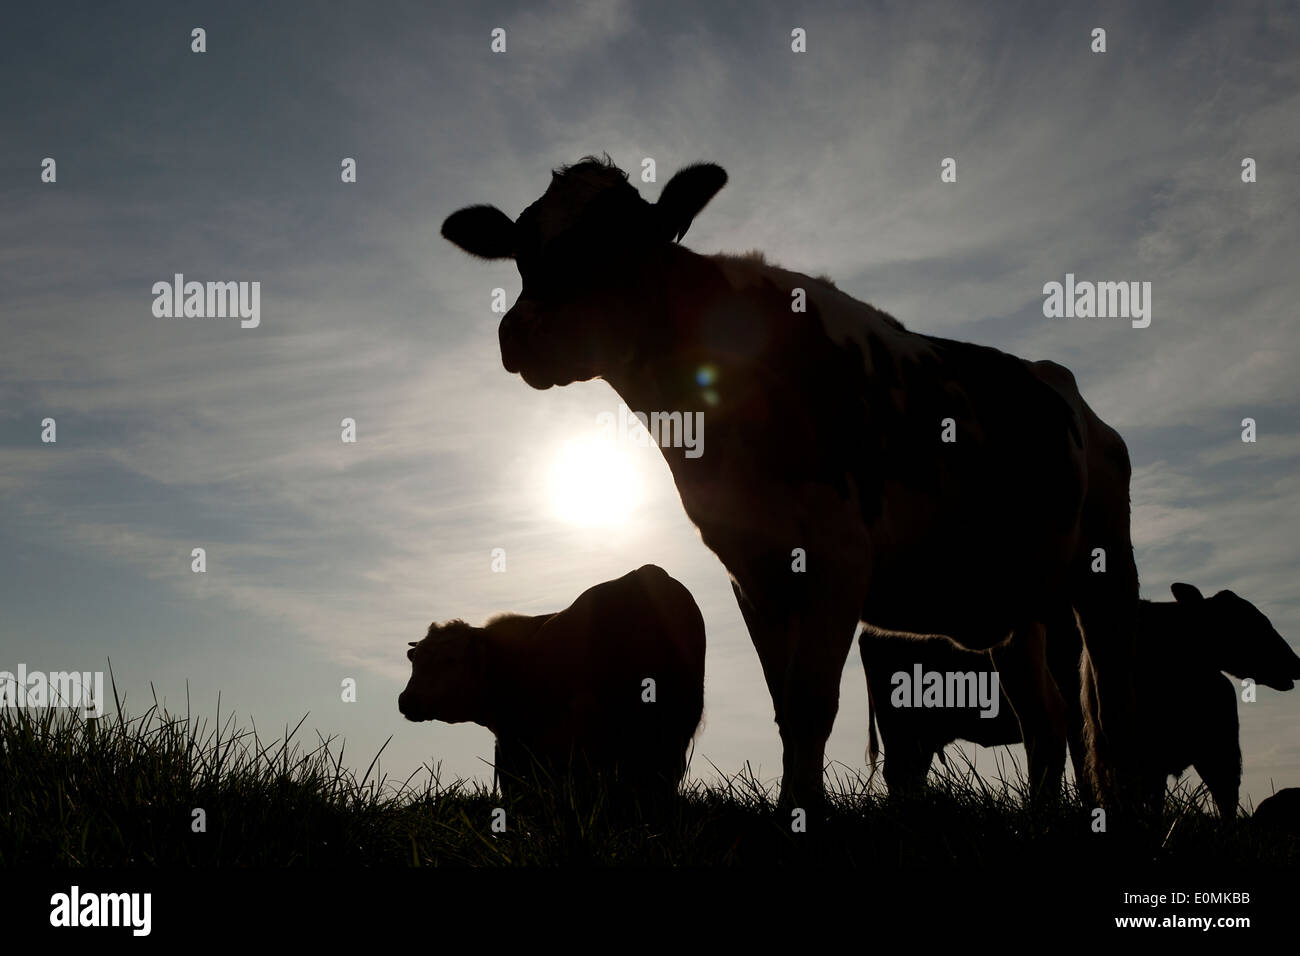 Cows silhouetted against the sky, Lowestoft, Suffolk, United Kingdom. Stock Photo